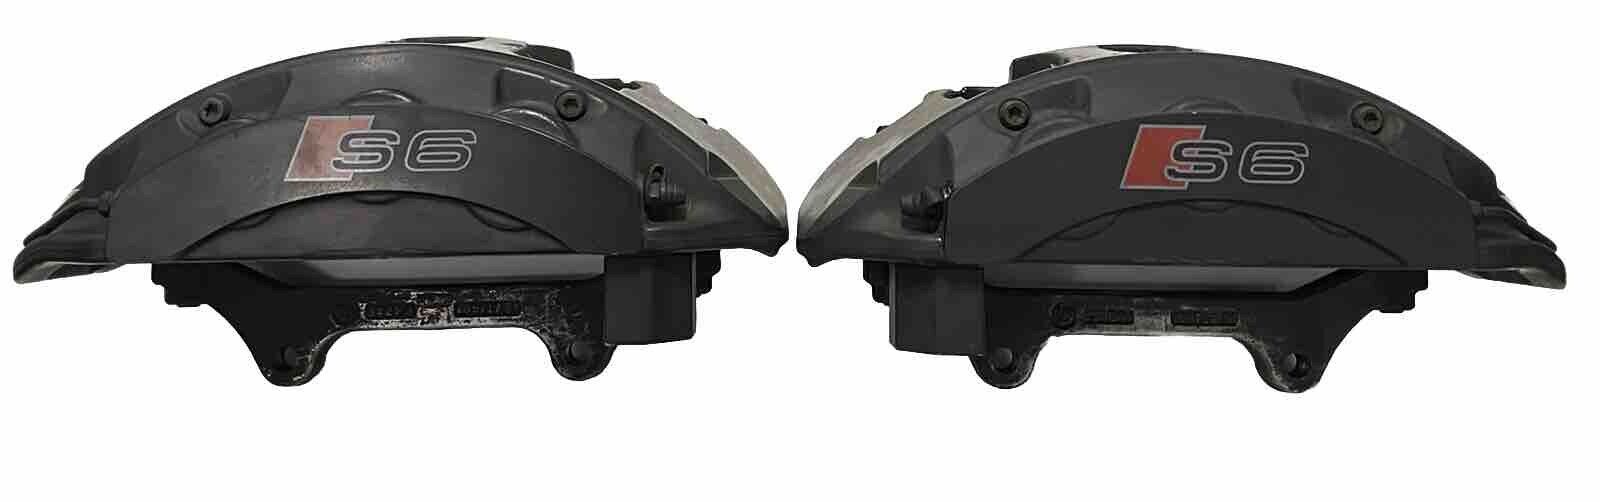 2013 AUDI S6 Pistons Front Calipers SET (L&R) OEM # 4G0615105AS # H3-1